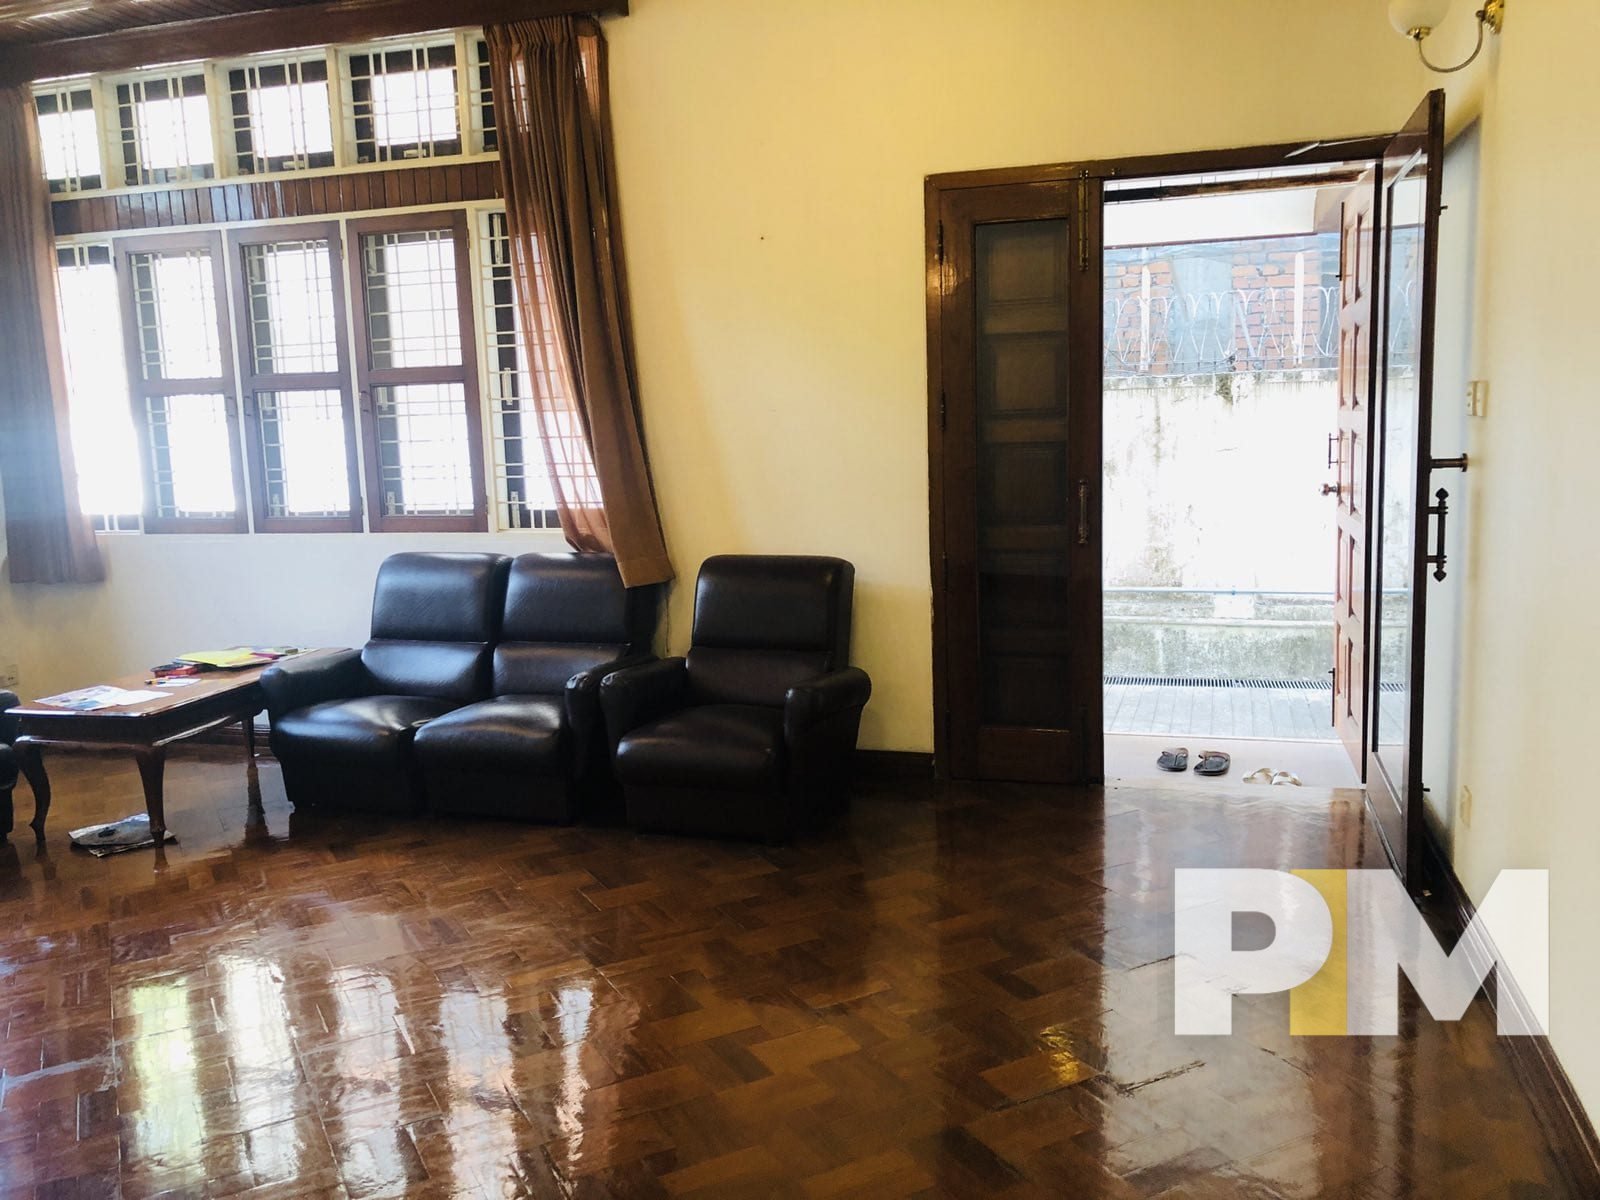 living room - house for rent in yangon